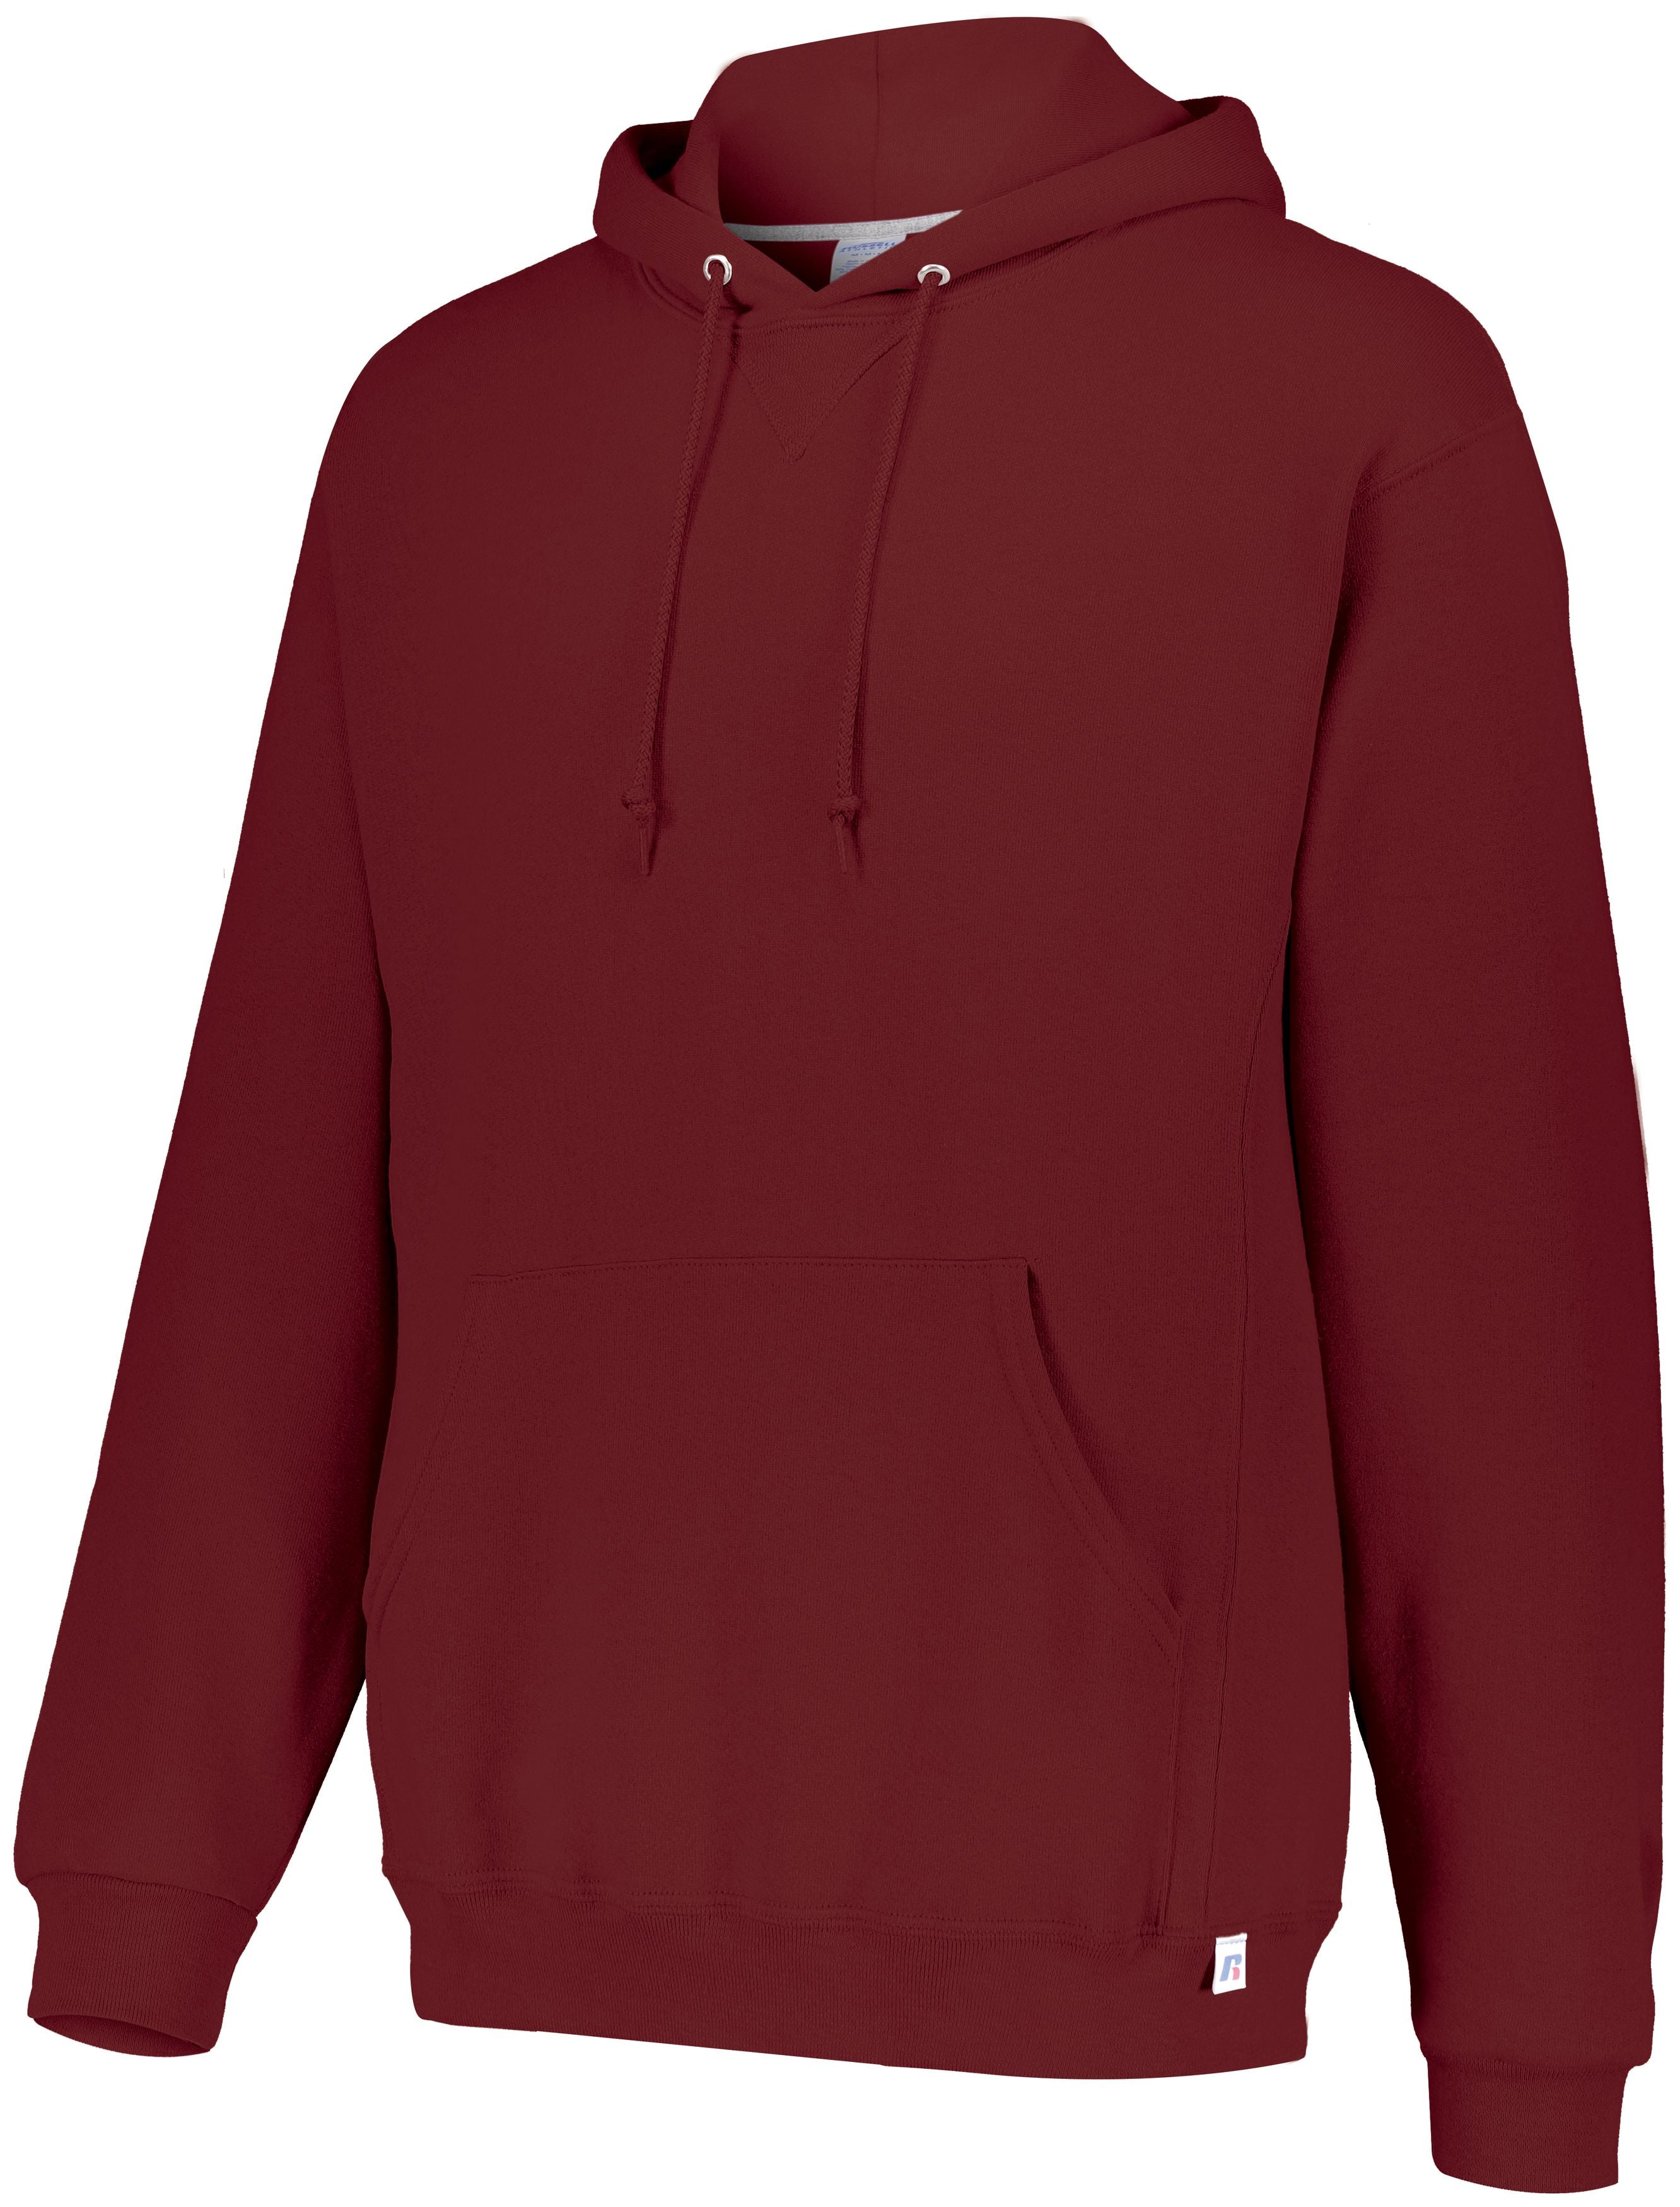 Russell Athletic Dri-Power Fleece Hoodie in Cardinal  -Part of the Adult, Russell-Athletic-Products, Shirts product lines at KanaleyCreations.com